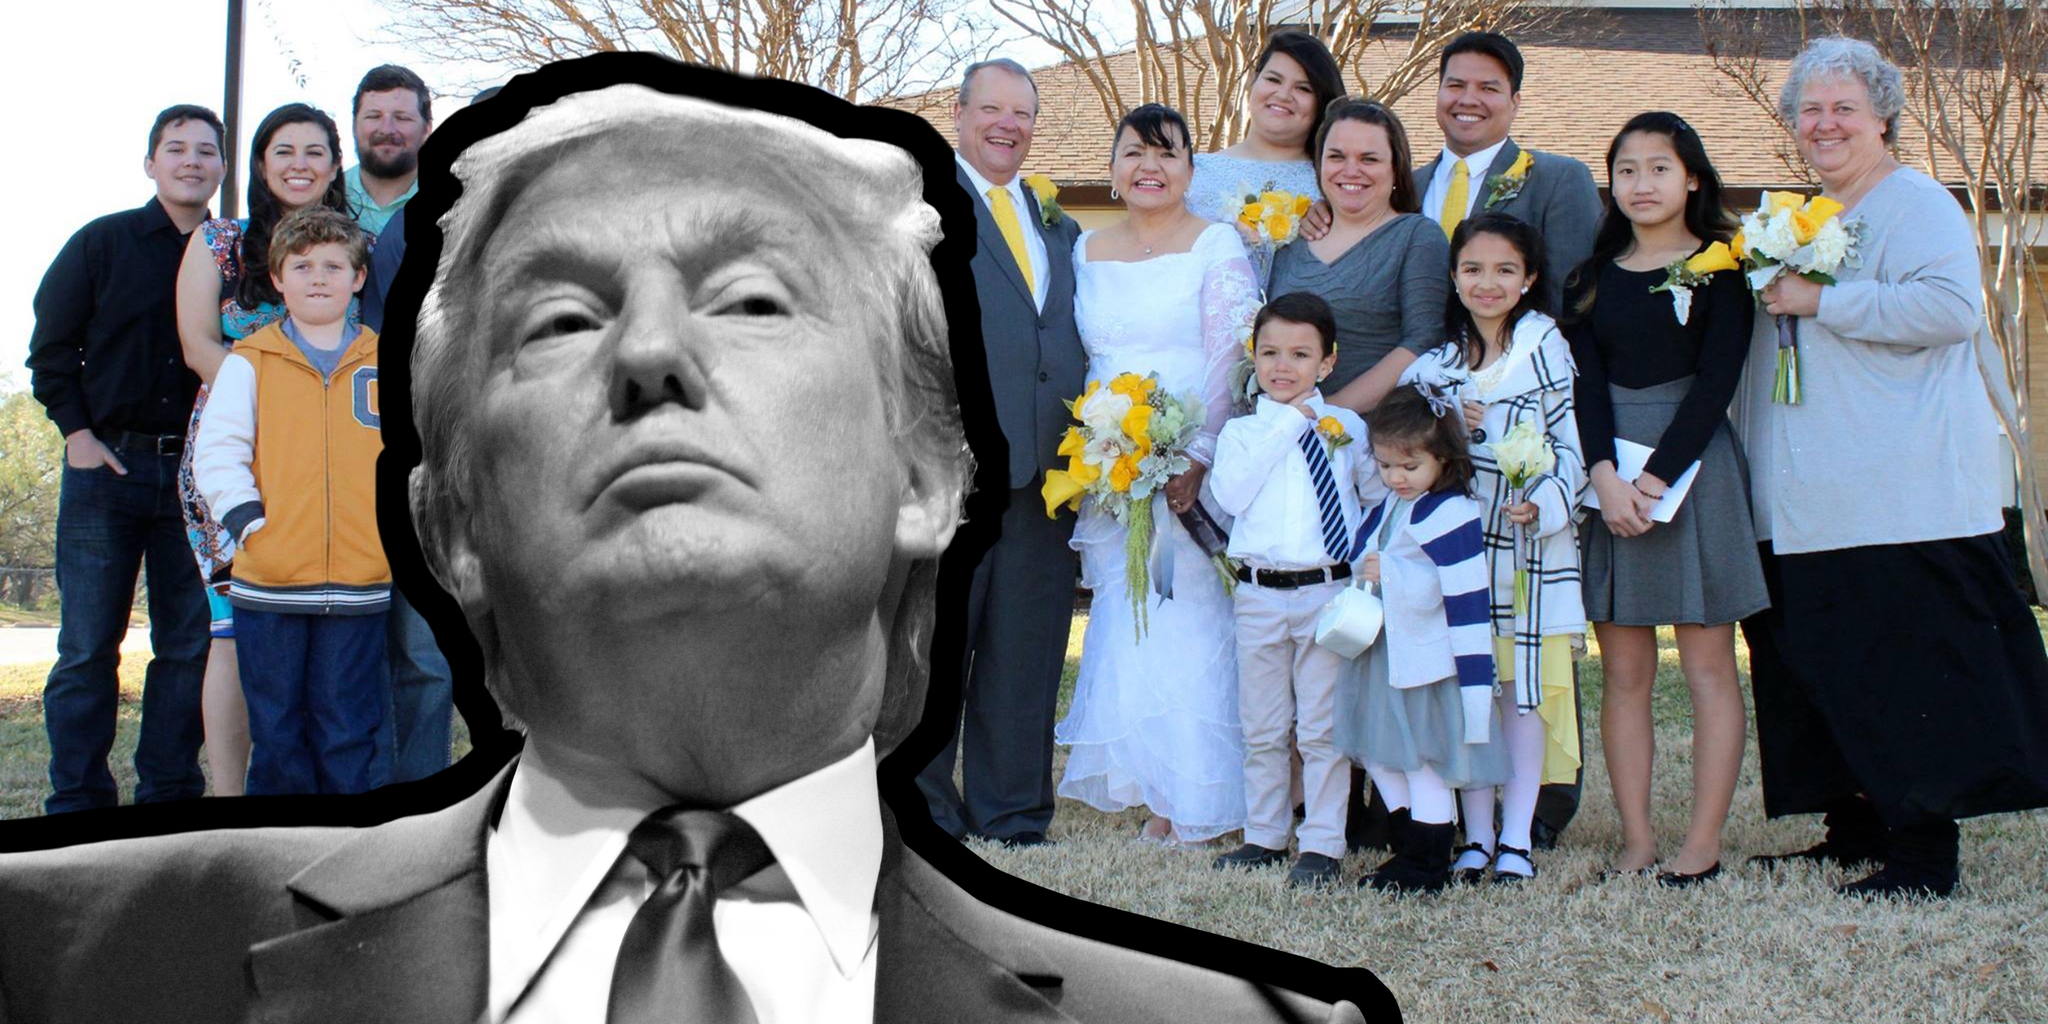 Donald Trump in front of wedding photo